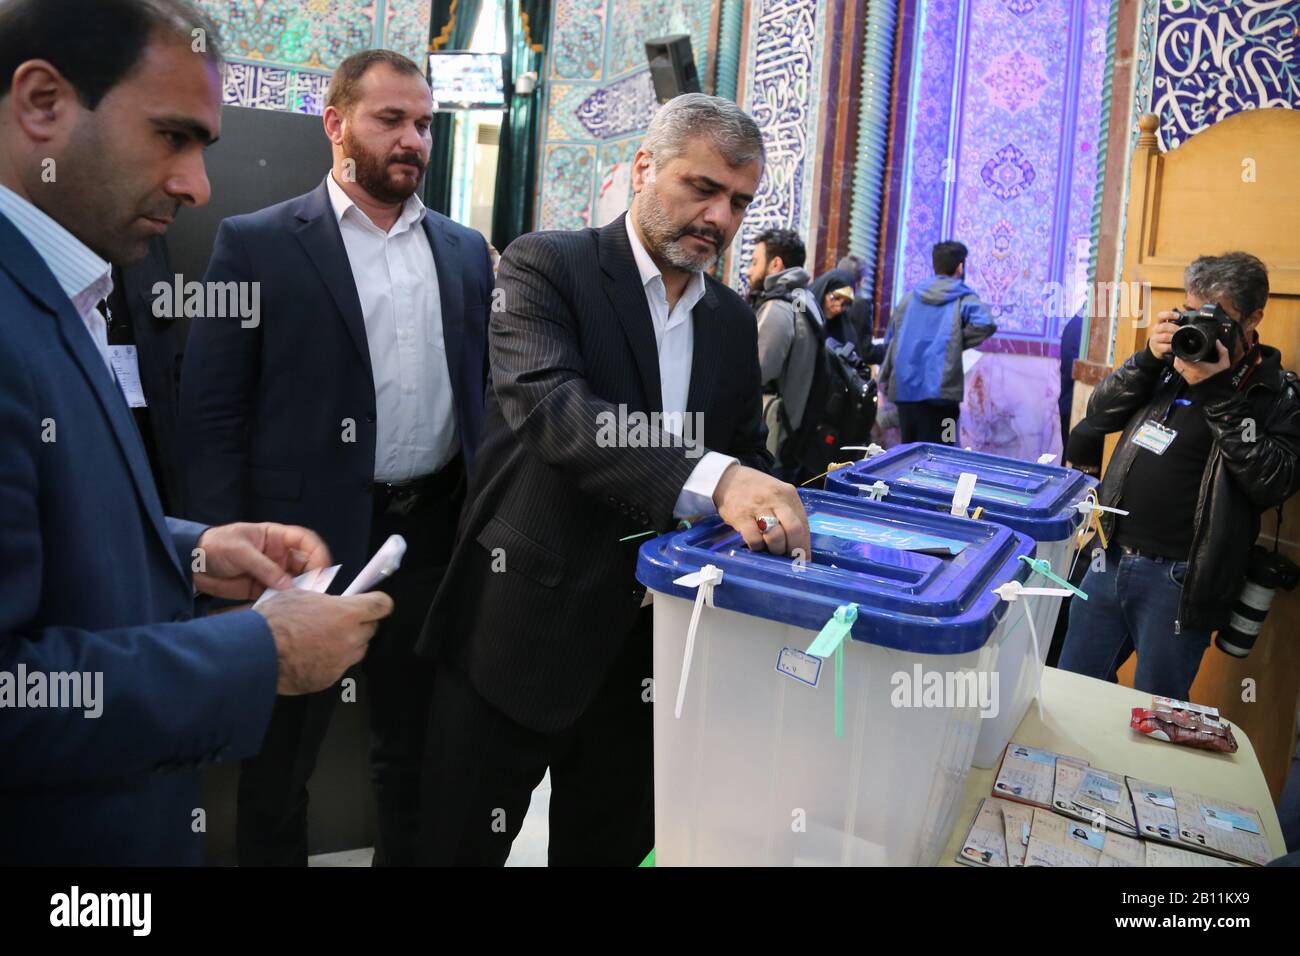 Tehran, IRAN. 21st Feb, 2020. Tehran's Prosecutor-General, ALI ALGHASI MEHR, is seen during parliamentary election at Hosseiniyeh Ershad polling station in northern Tehran, Iran. Conservatives are expected to dominate the general election after an economic slump, multiple crises and the disqualification of thousands of candidates. Voters formed long lines at polling stations in south Tehran, where conservatives have a solid support base, but far fewer were seen waiting to vote in upmarket northern neighborhoods. Credit: Rouzbeh Fouladi/ZUMA Wire/Alamy Live News Stock Photo